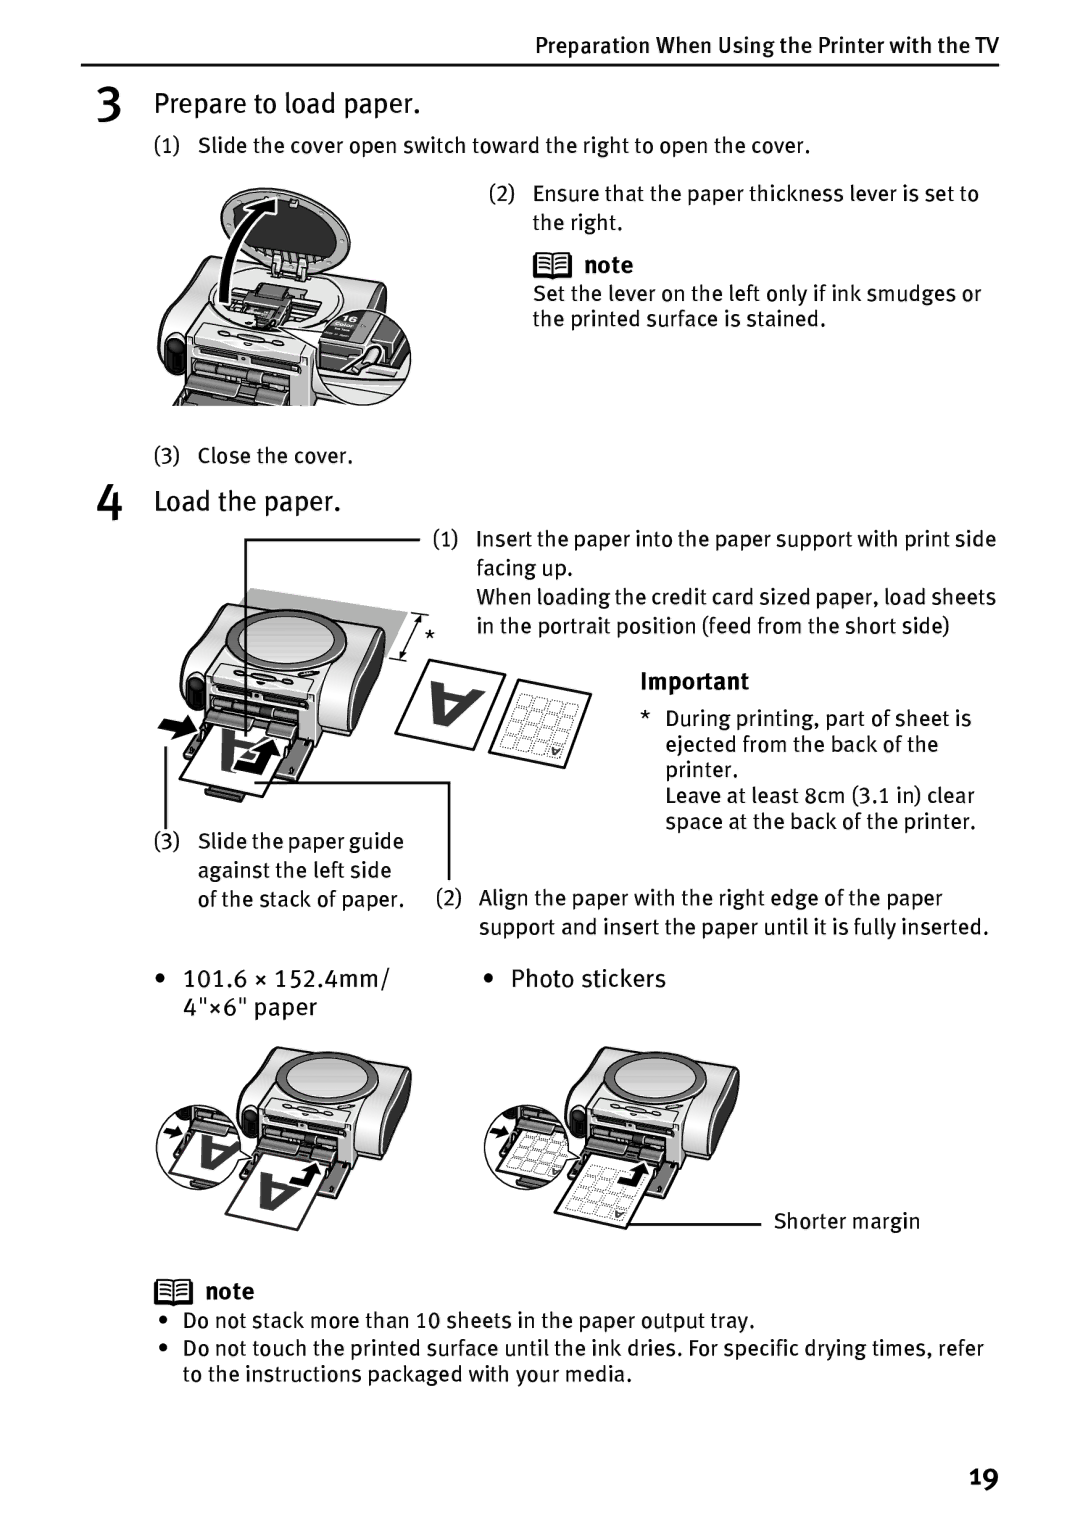 Canon DS700 manual Prepare to load paper, Load the paper, 101.6 × 152.4mm Photo stickers ×6 paper 